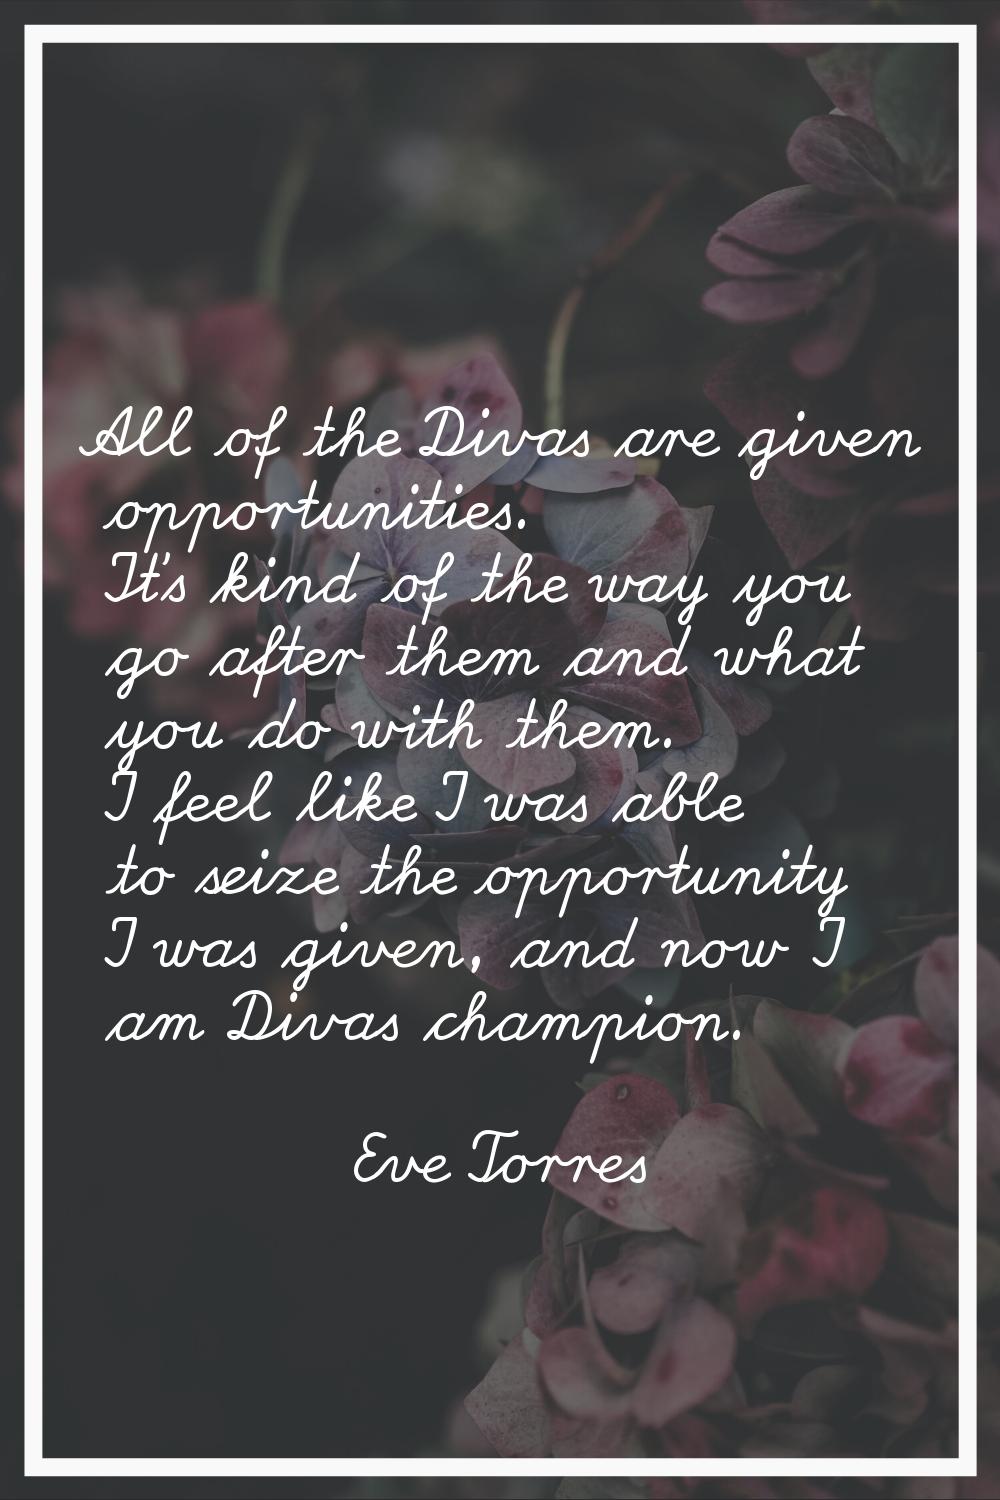 All of the Divas are given opportunities. It's kind of the way you go after them and what you do wi